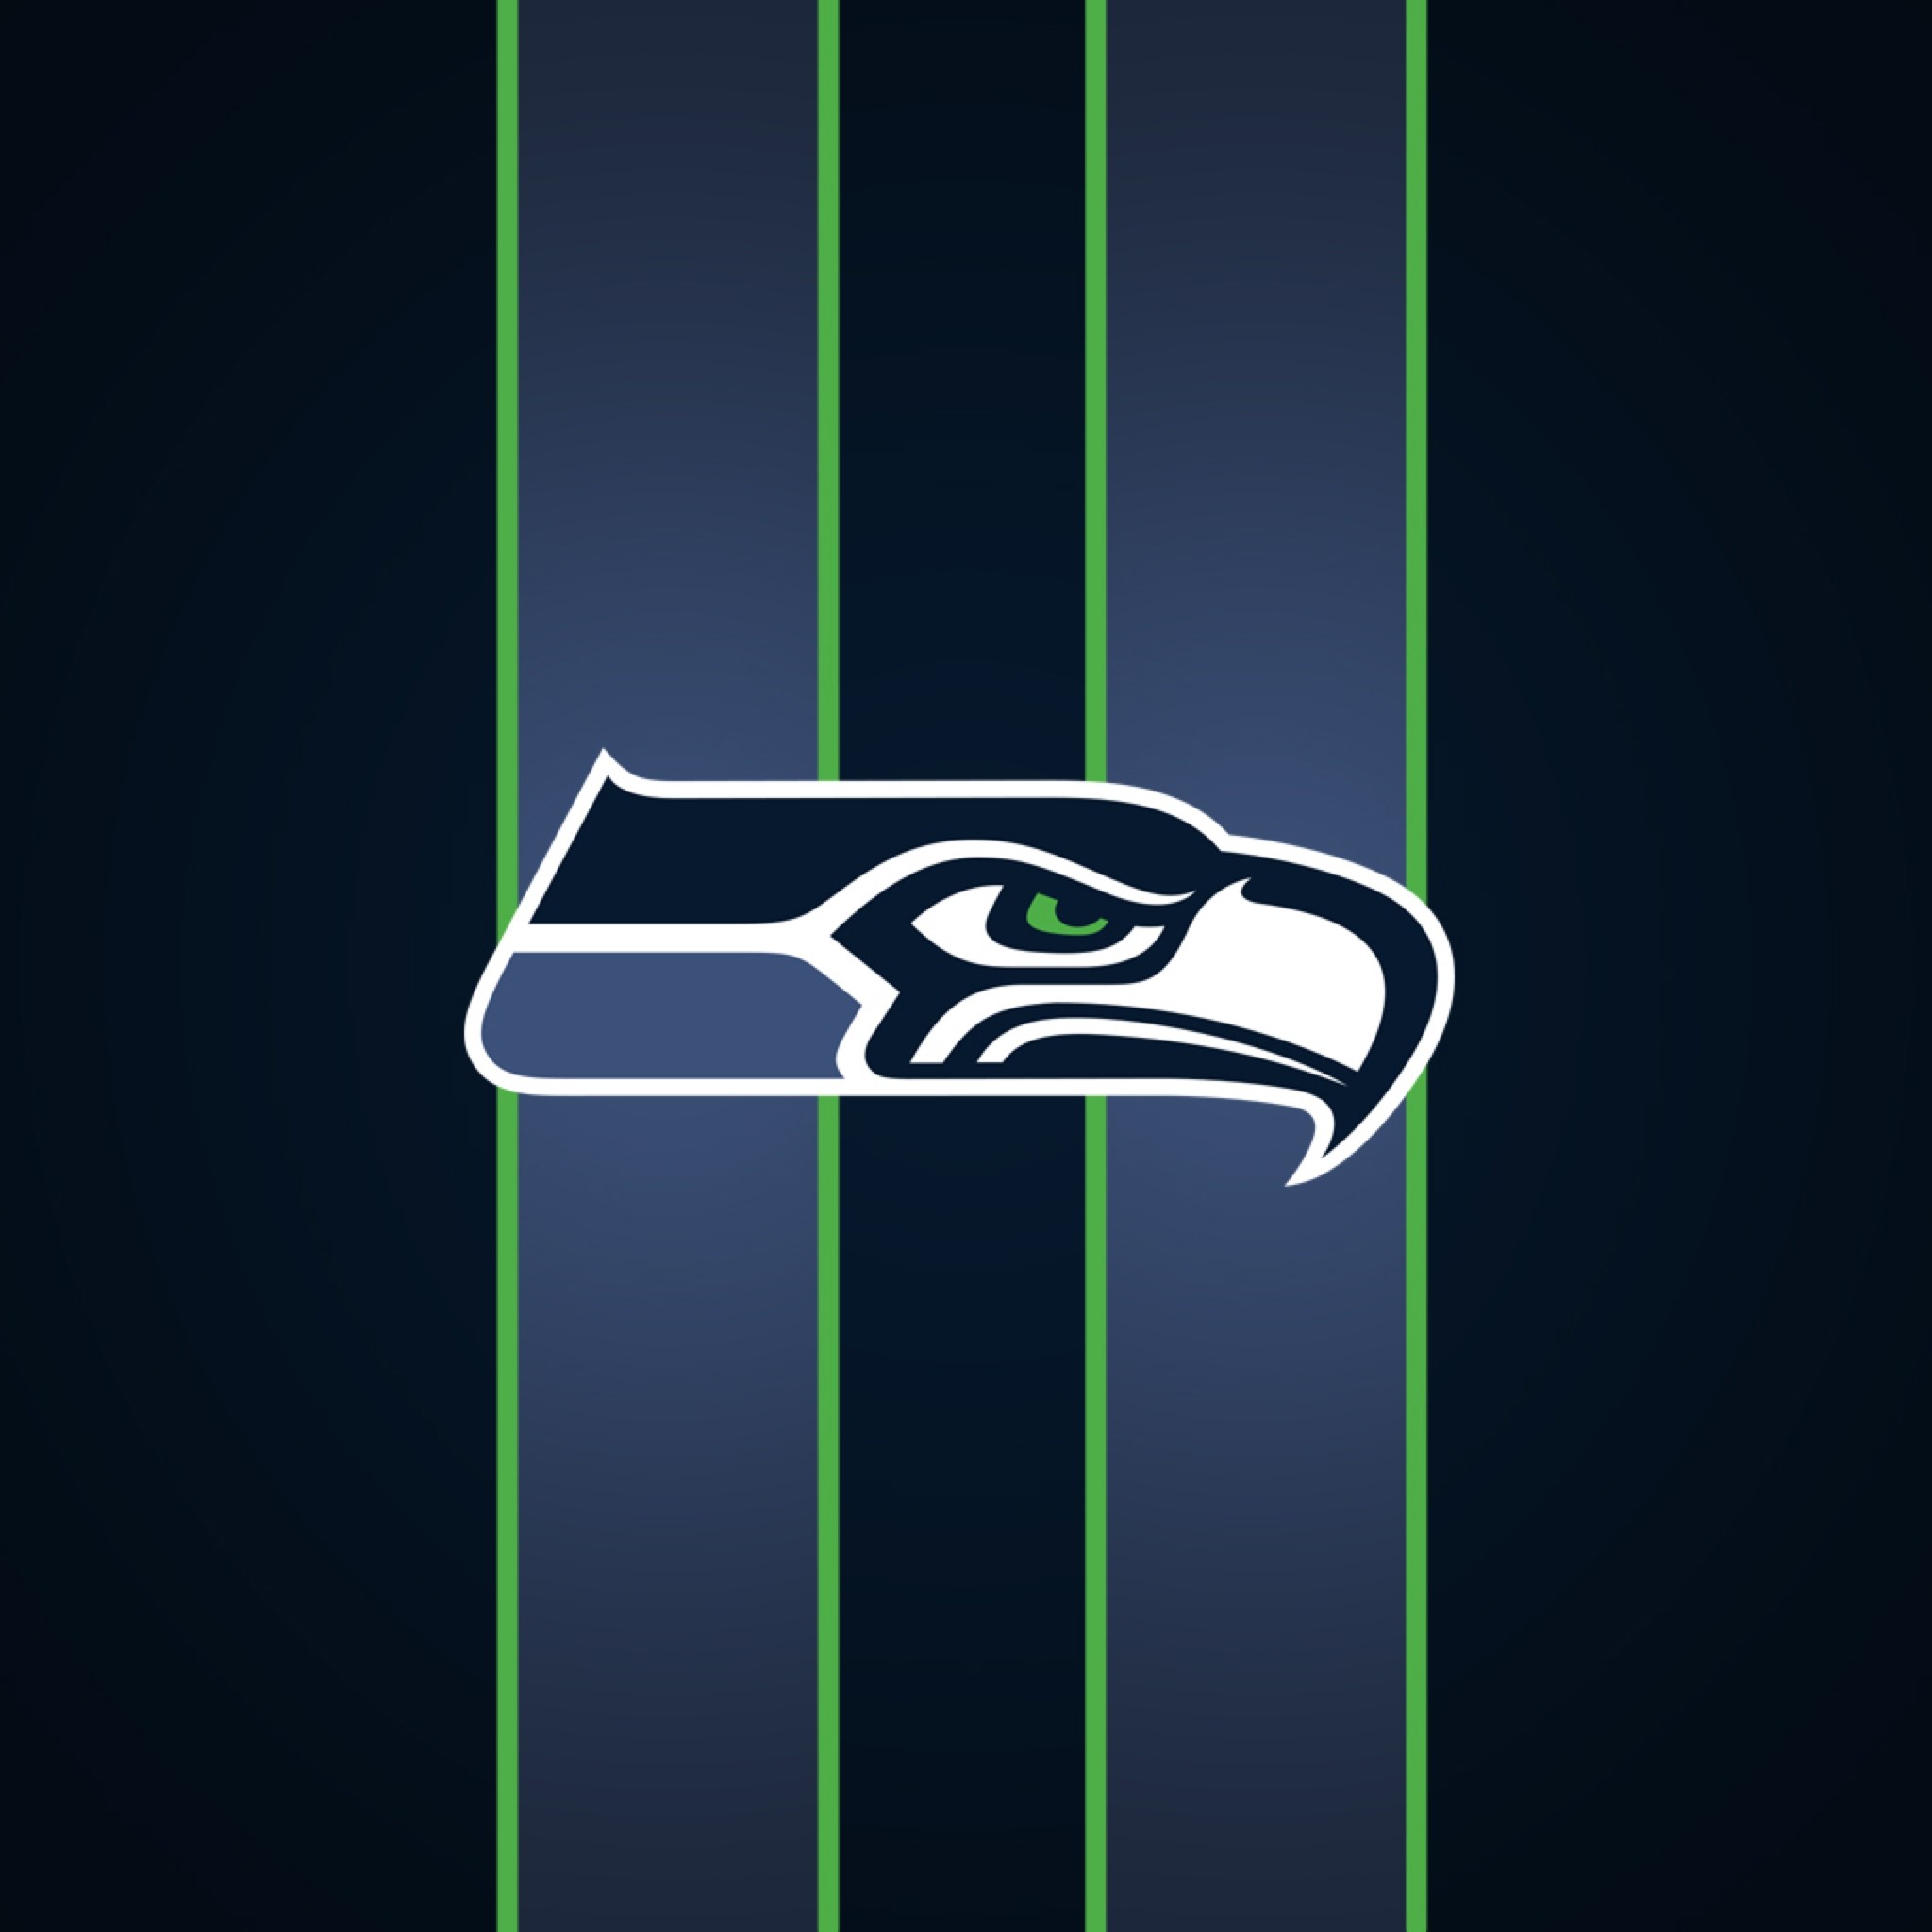 2048x2048 ... Wallpaper Weekends: Super Bowl Sunday Wallpapers for the iPhone and iPad